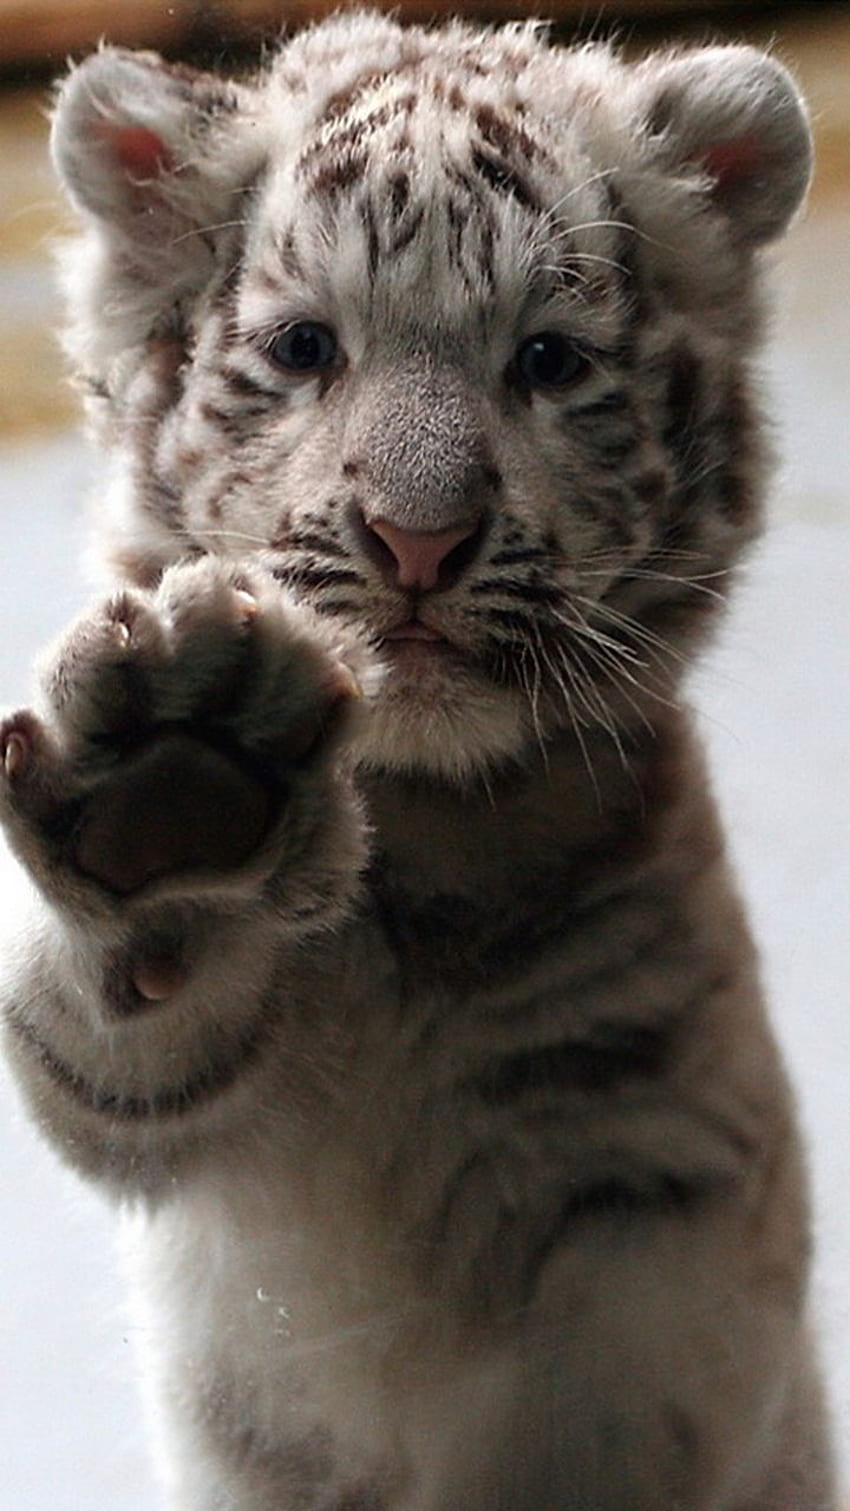 Wildlife Photography Of Cute Baby Tiger Photo | JPG Free Download - Pikbest